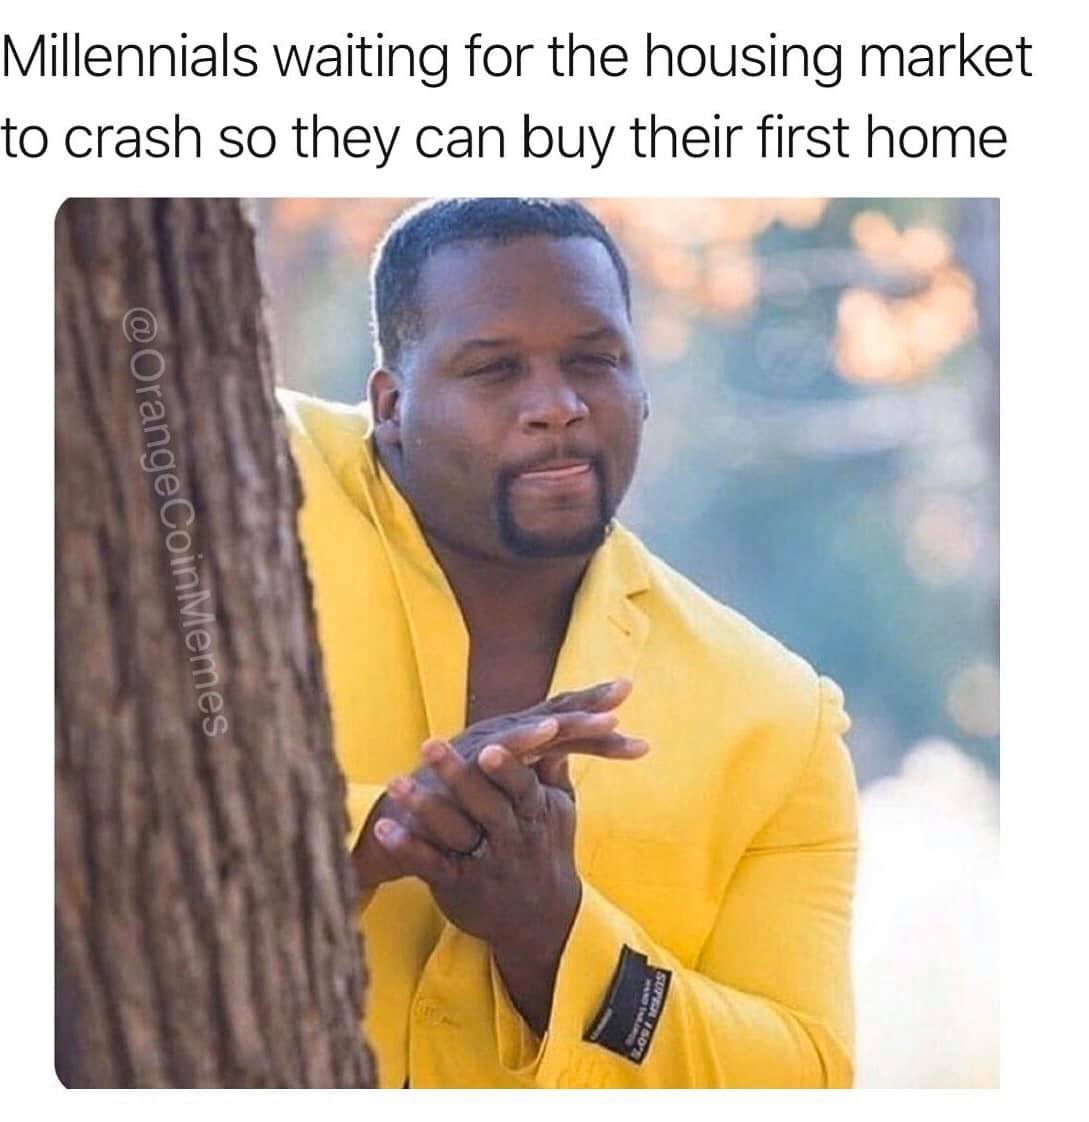 millennials waiting for the housing market to crash so they can buy their first home, meme